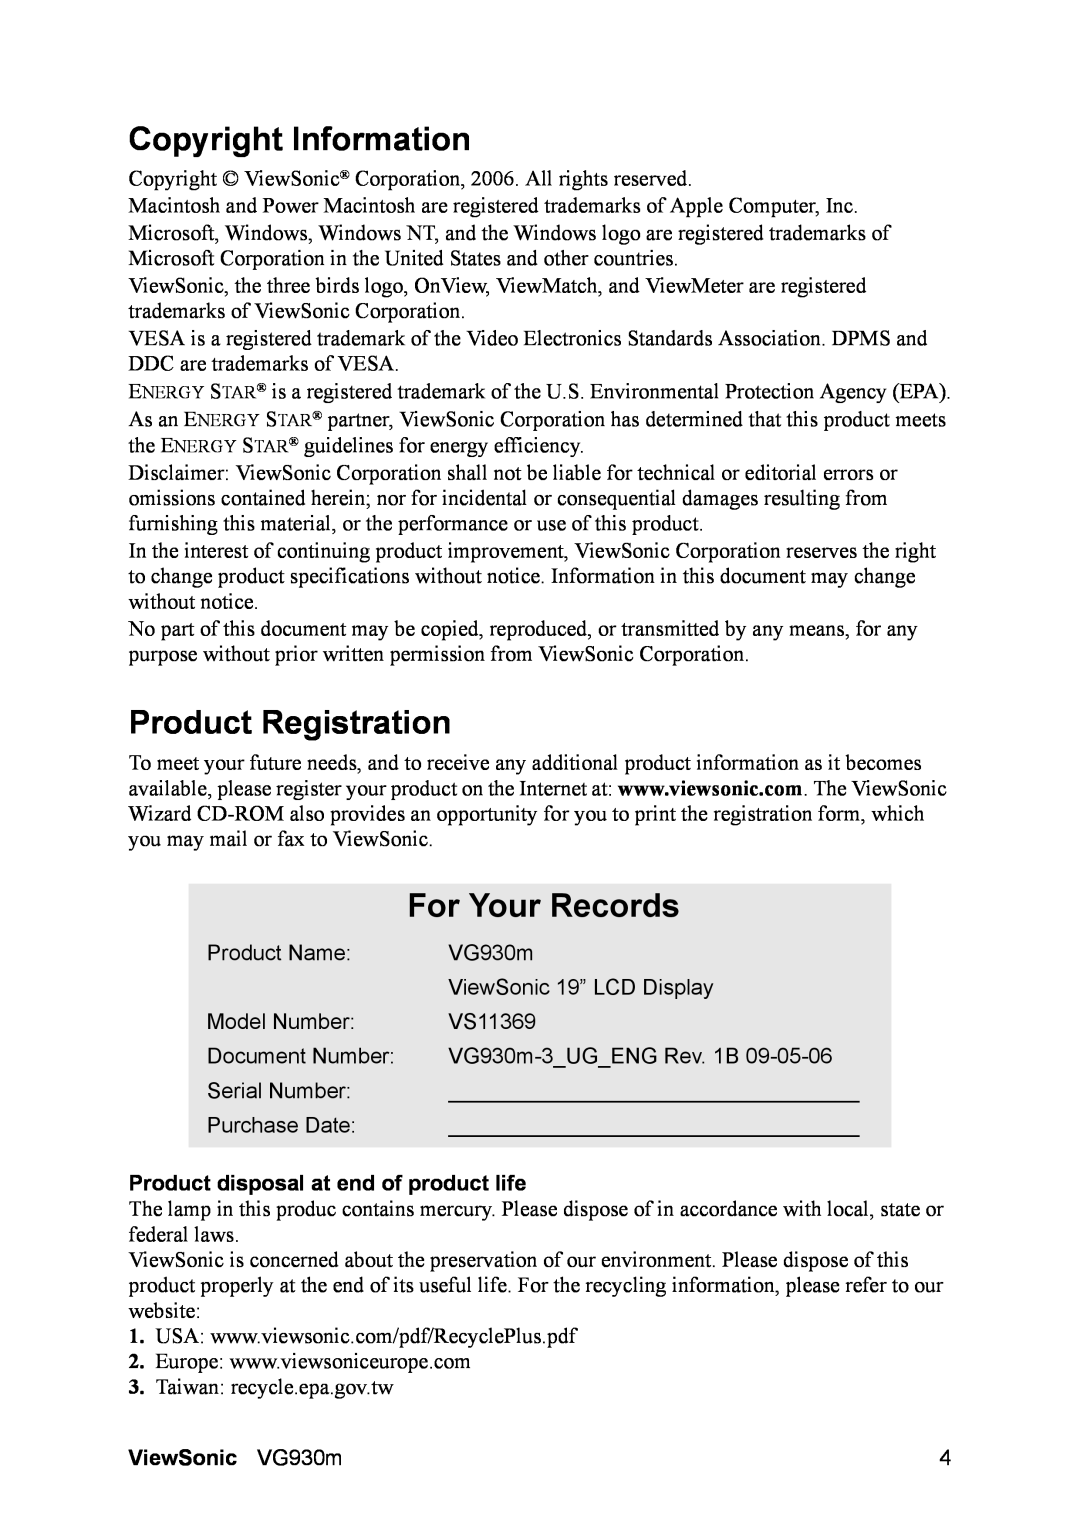 ViewSonic VG930m Copyright Information, Product Registration, For Your Records, Product disposal at end of product life 